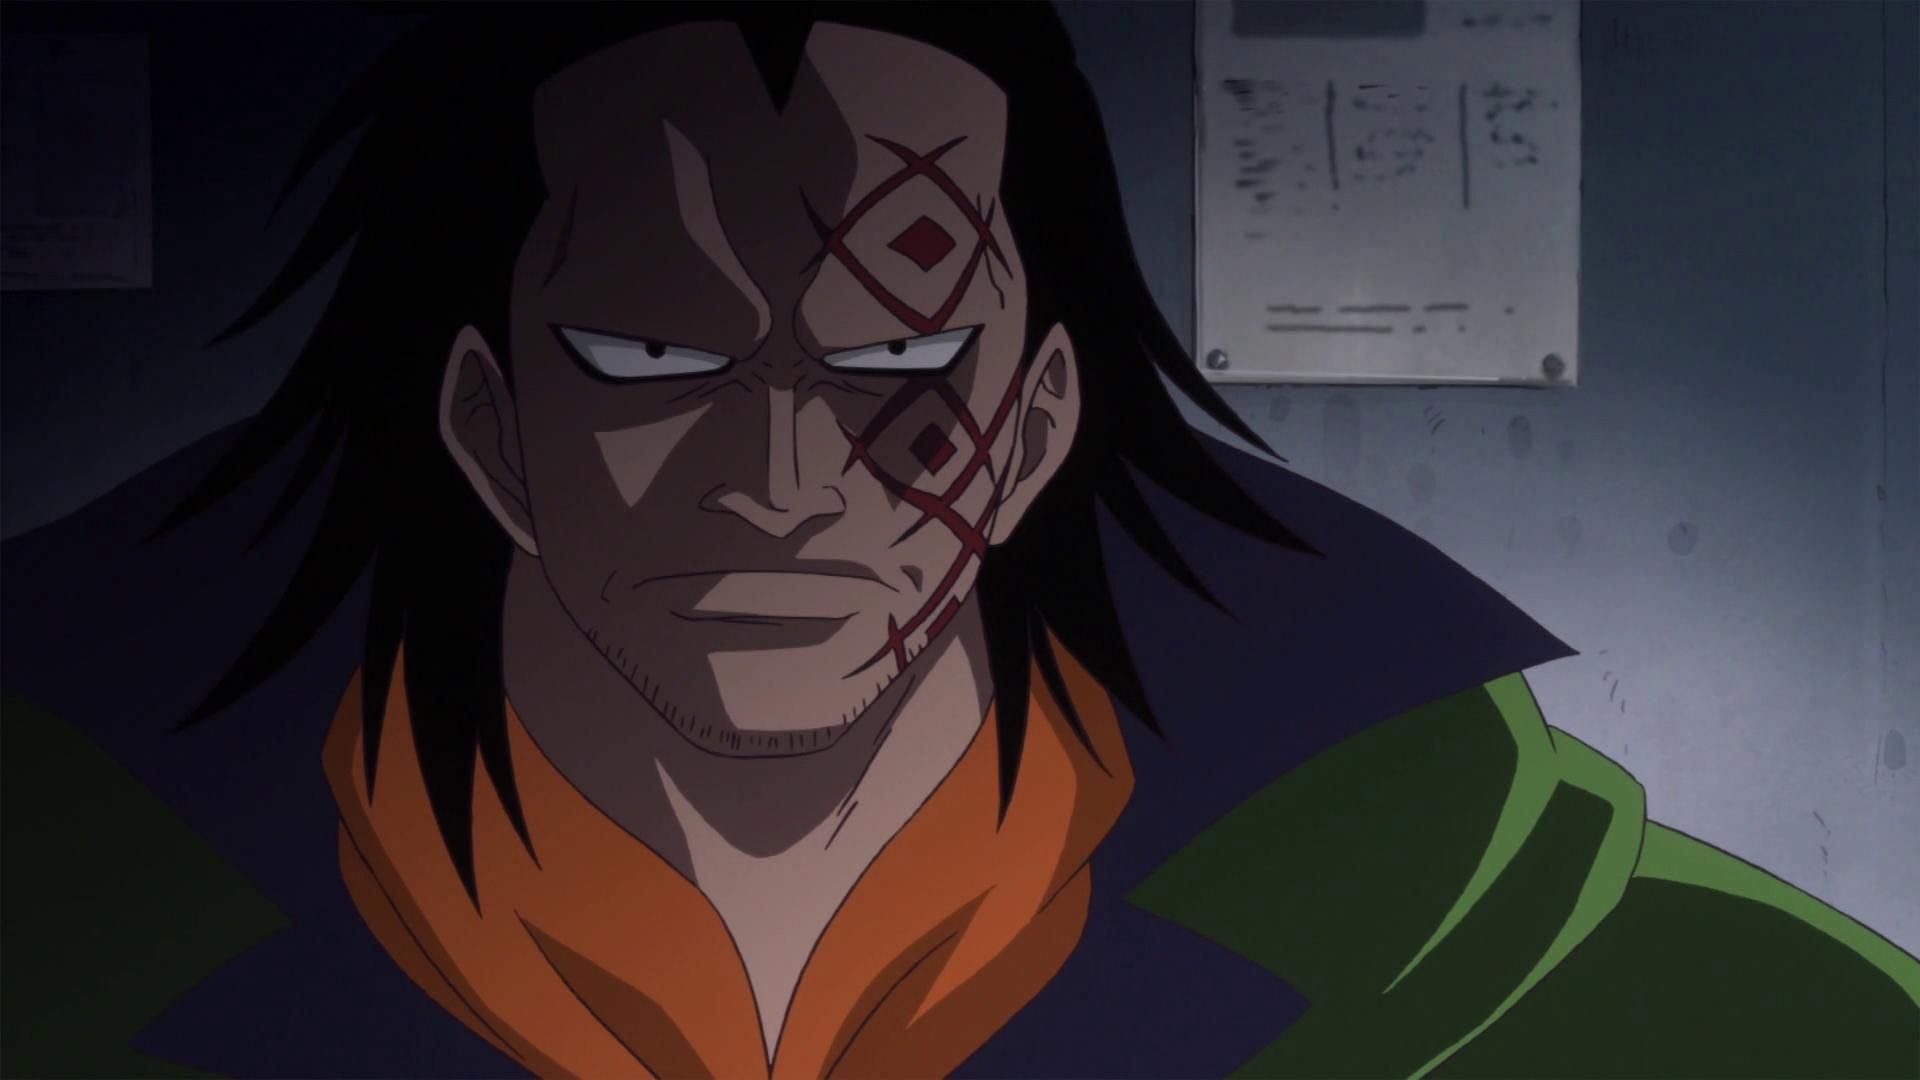 Dragon might make his move in chapter 1100 (Image via Toei Animation, One Piece)